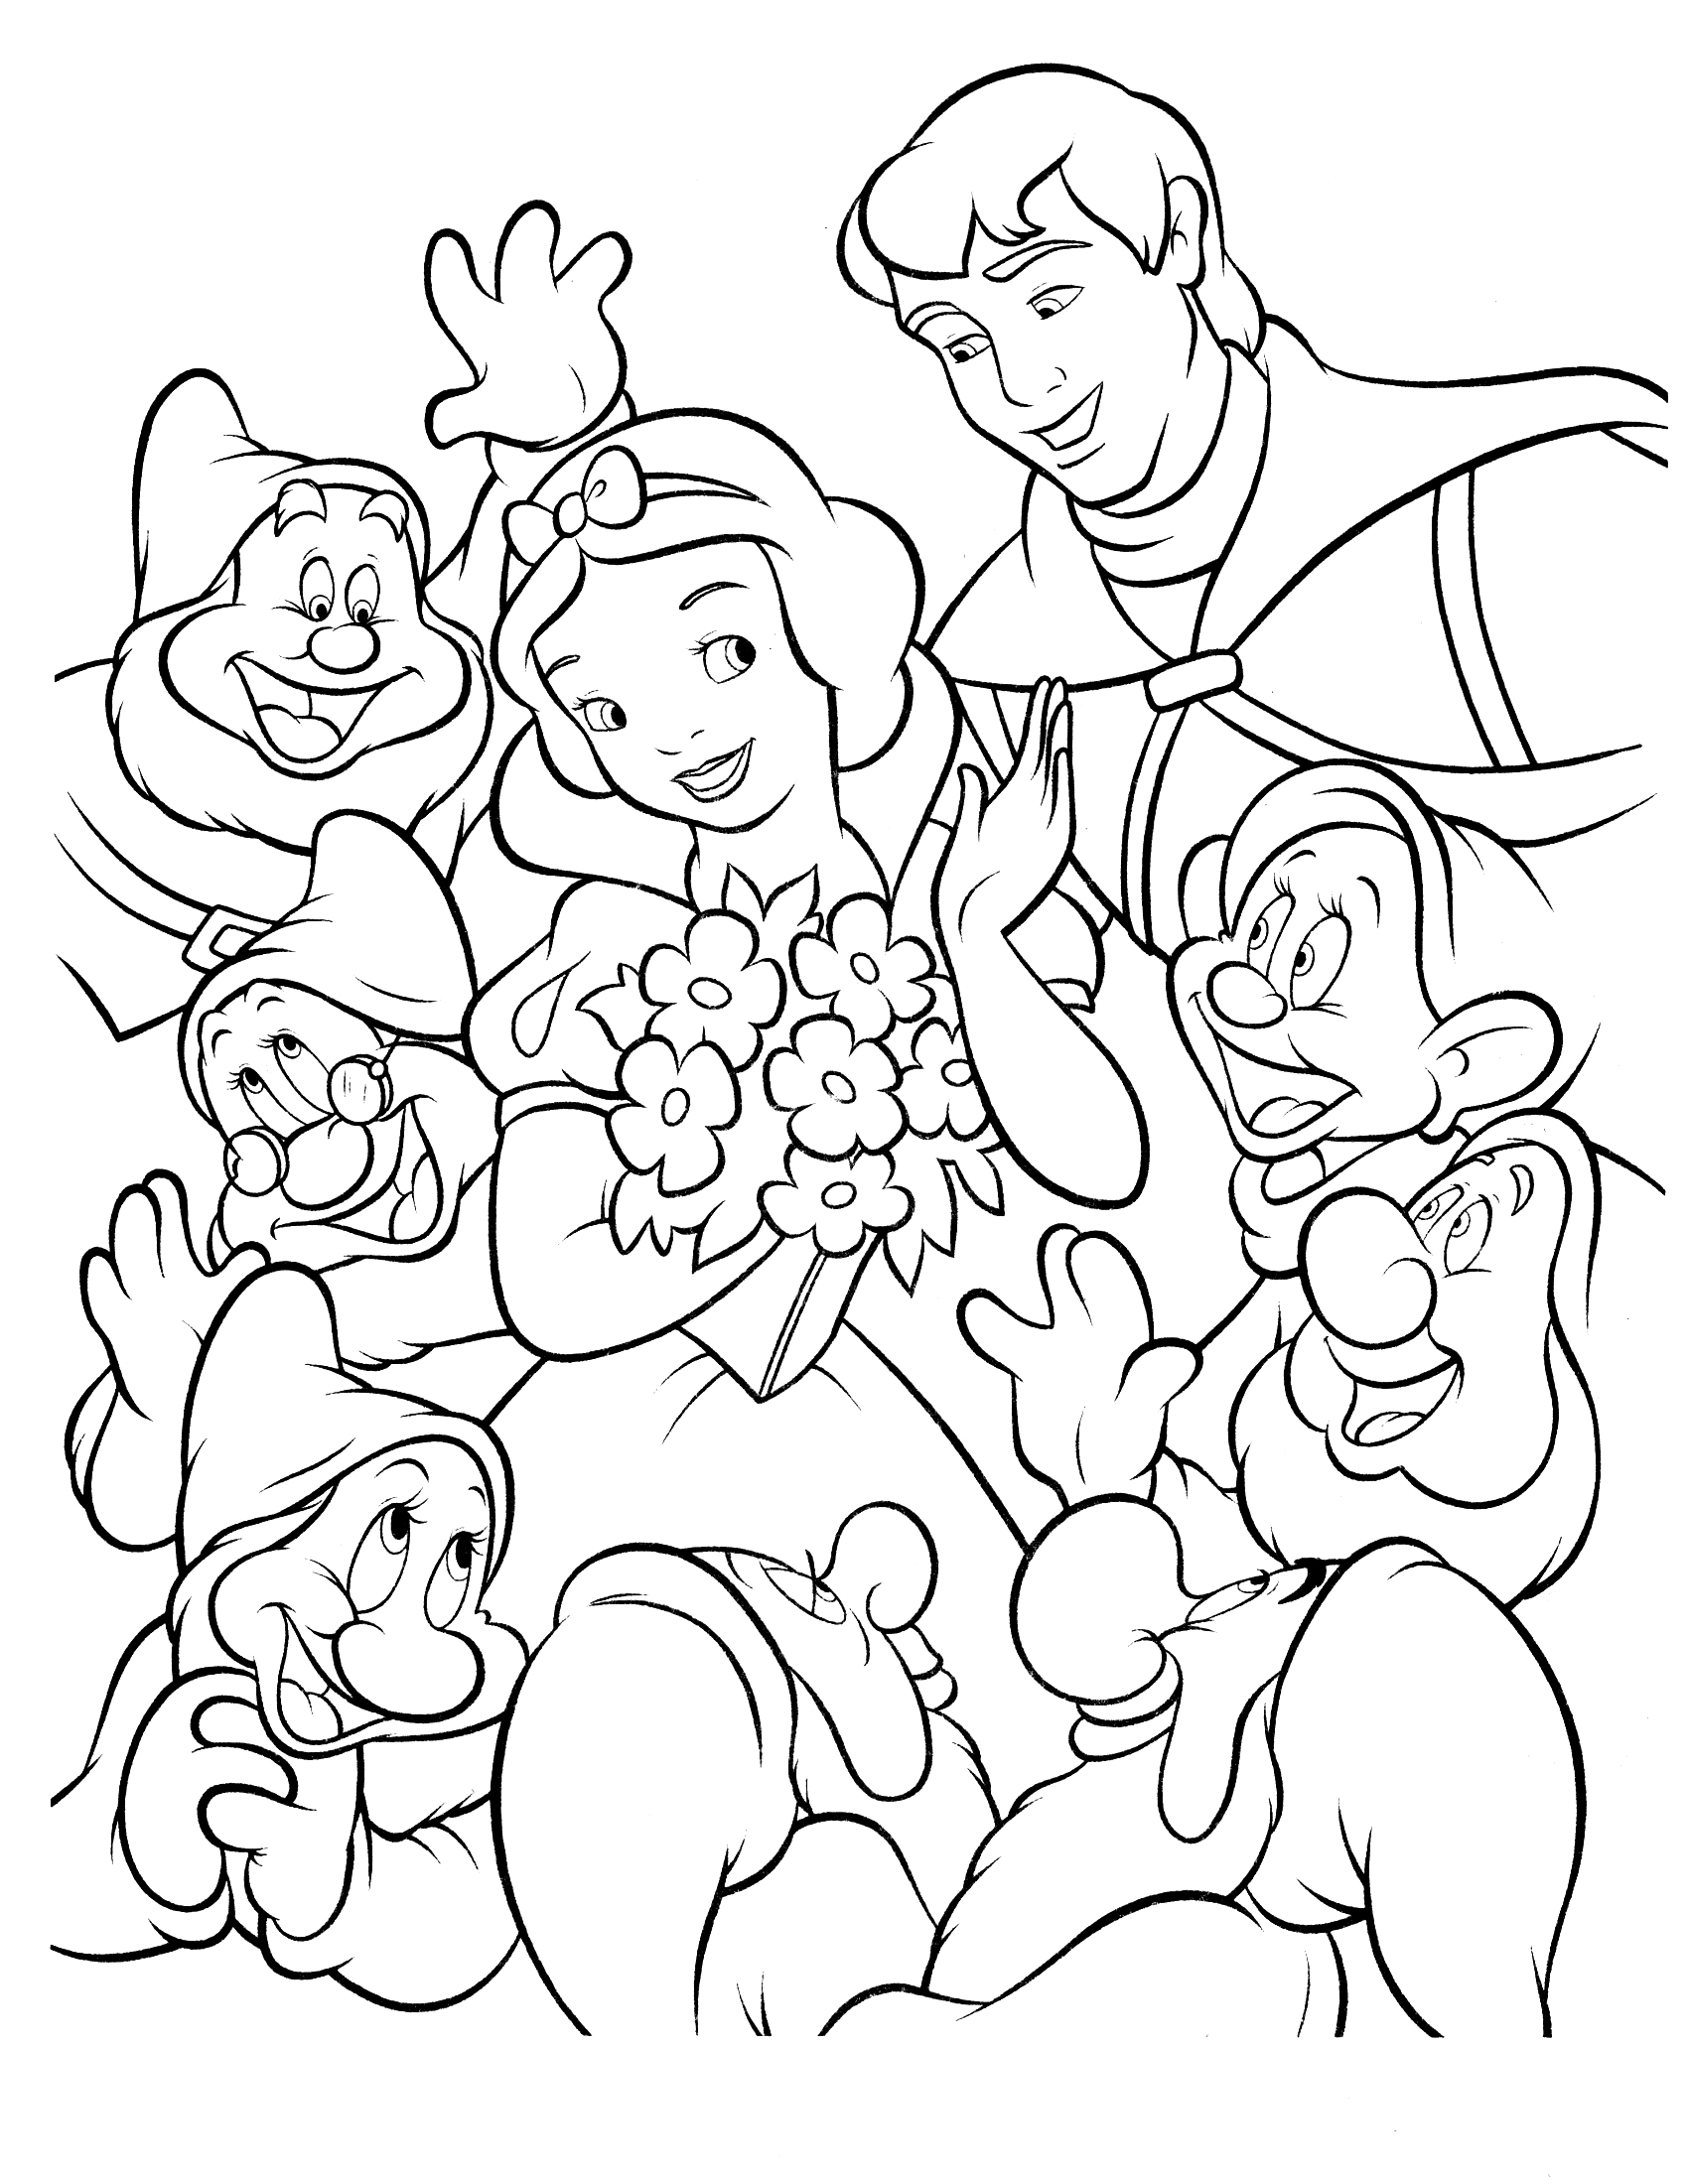 Snow White the main characters